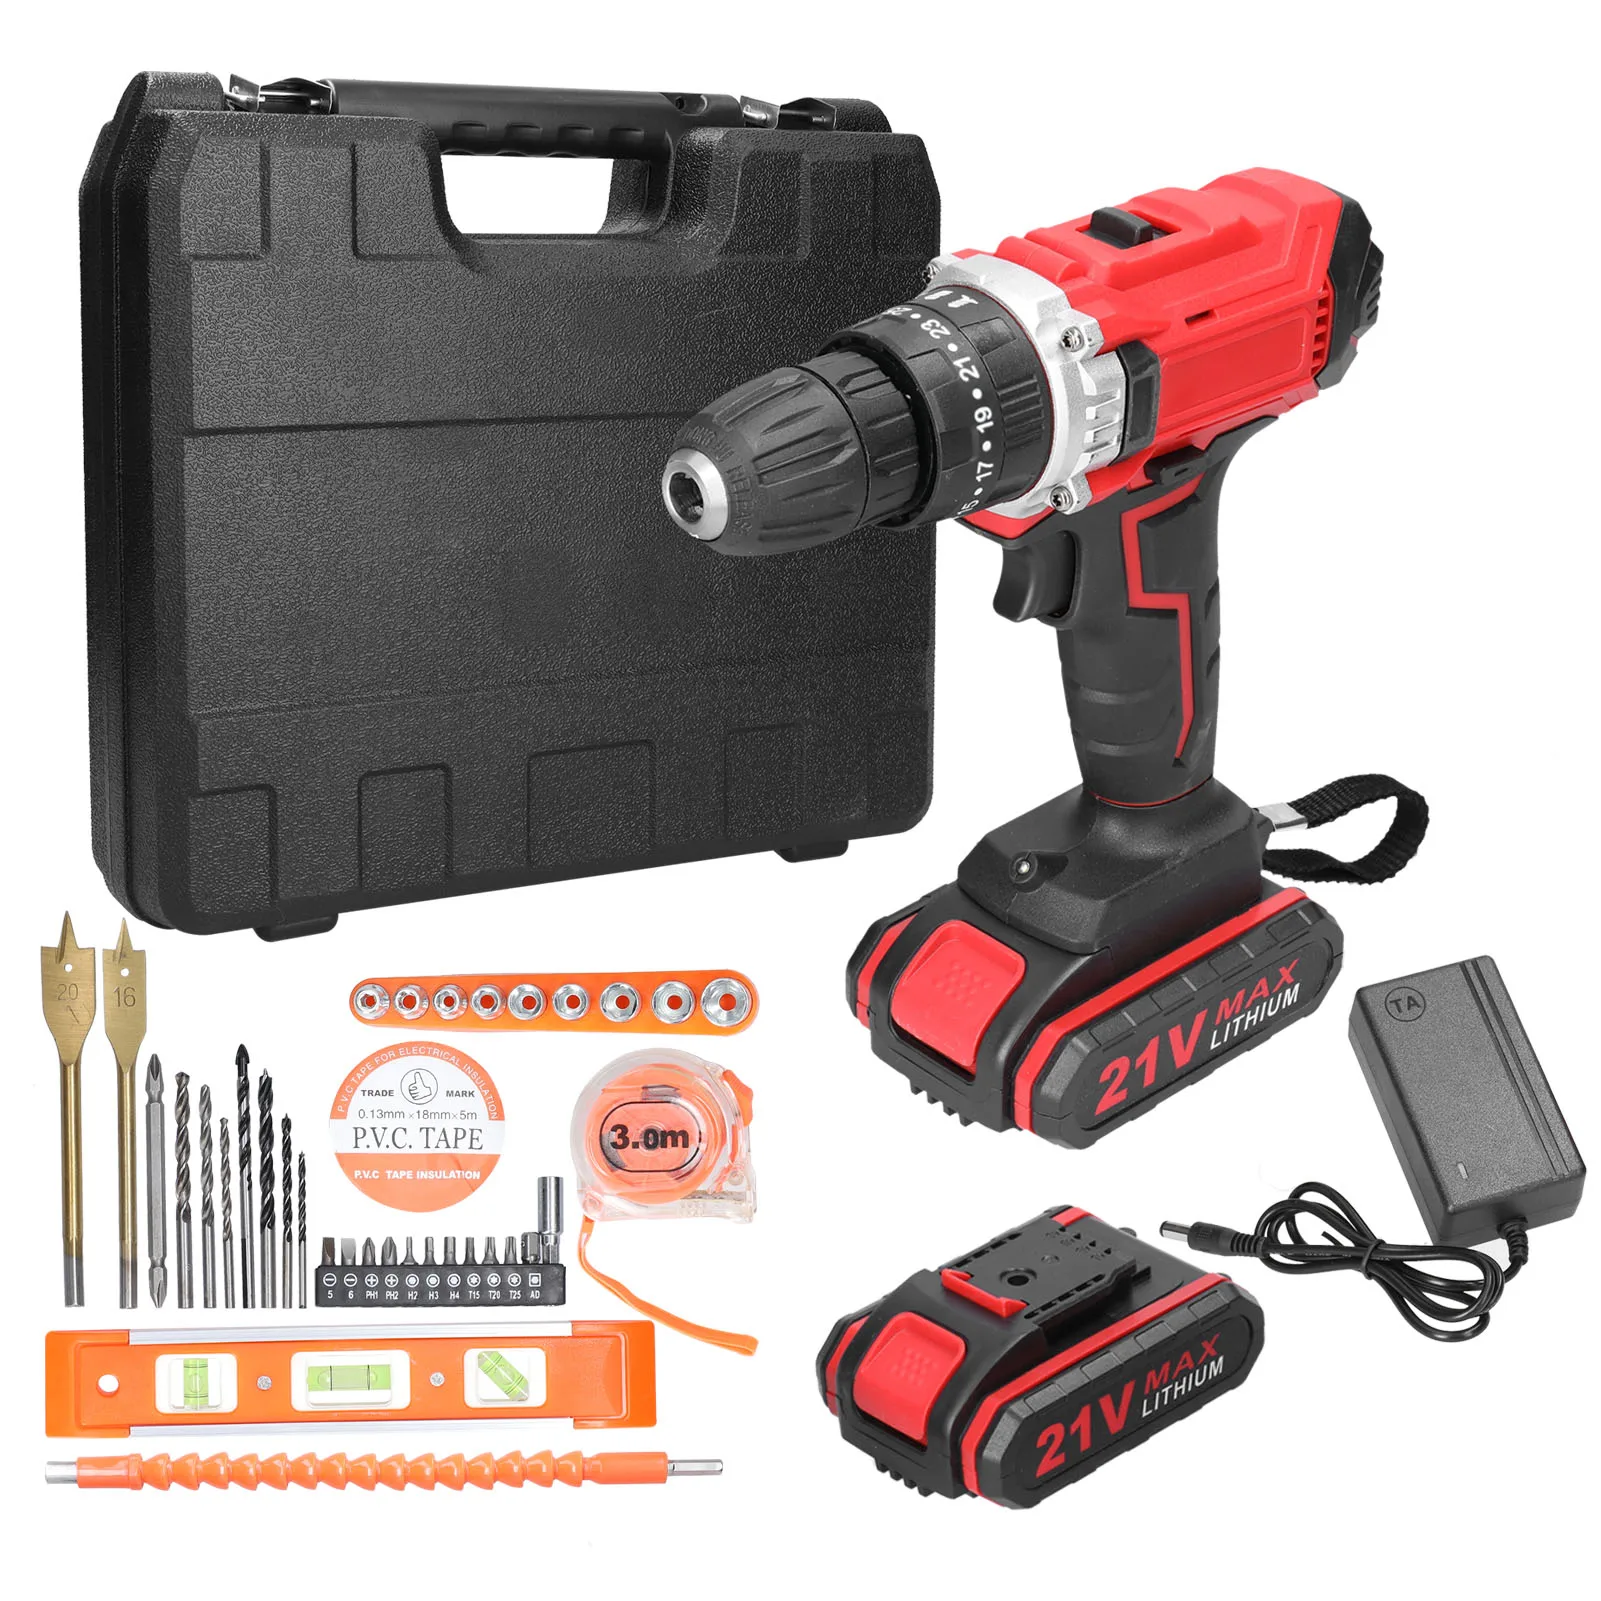 

21V 3in1 Impact Flat Drill Electric Screwdriver 2 Speeds Switchable Rotation Ways Adjustment 25+1 Gears of Torques Adjustable